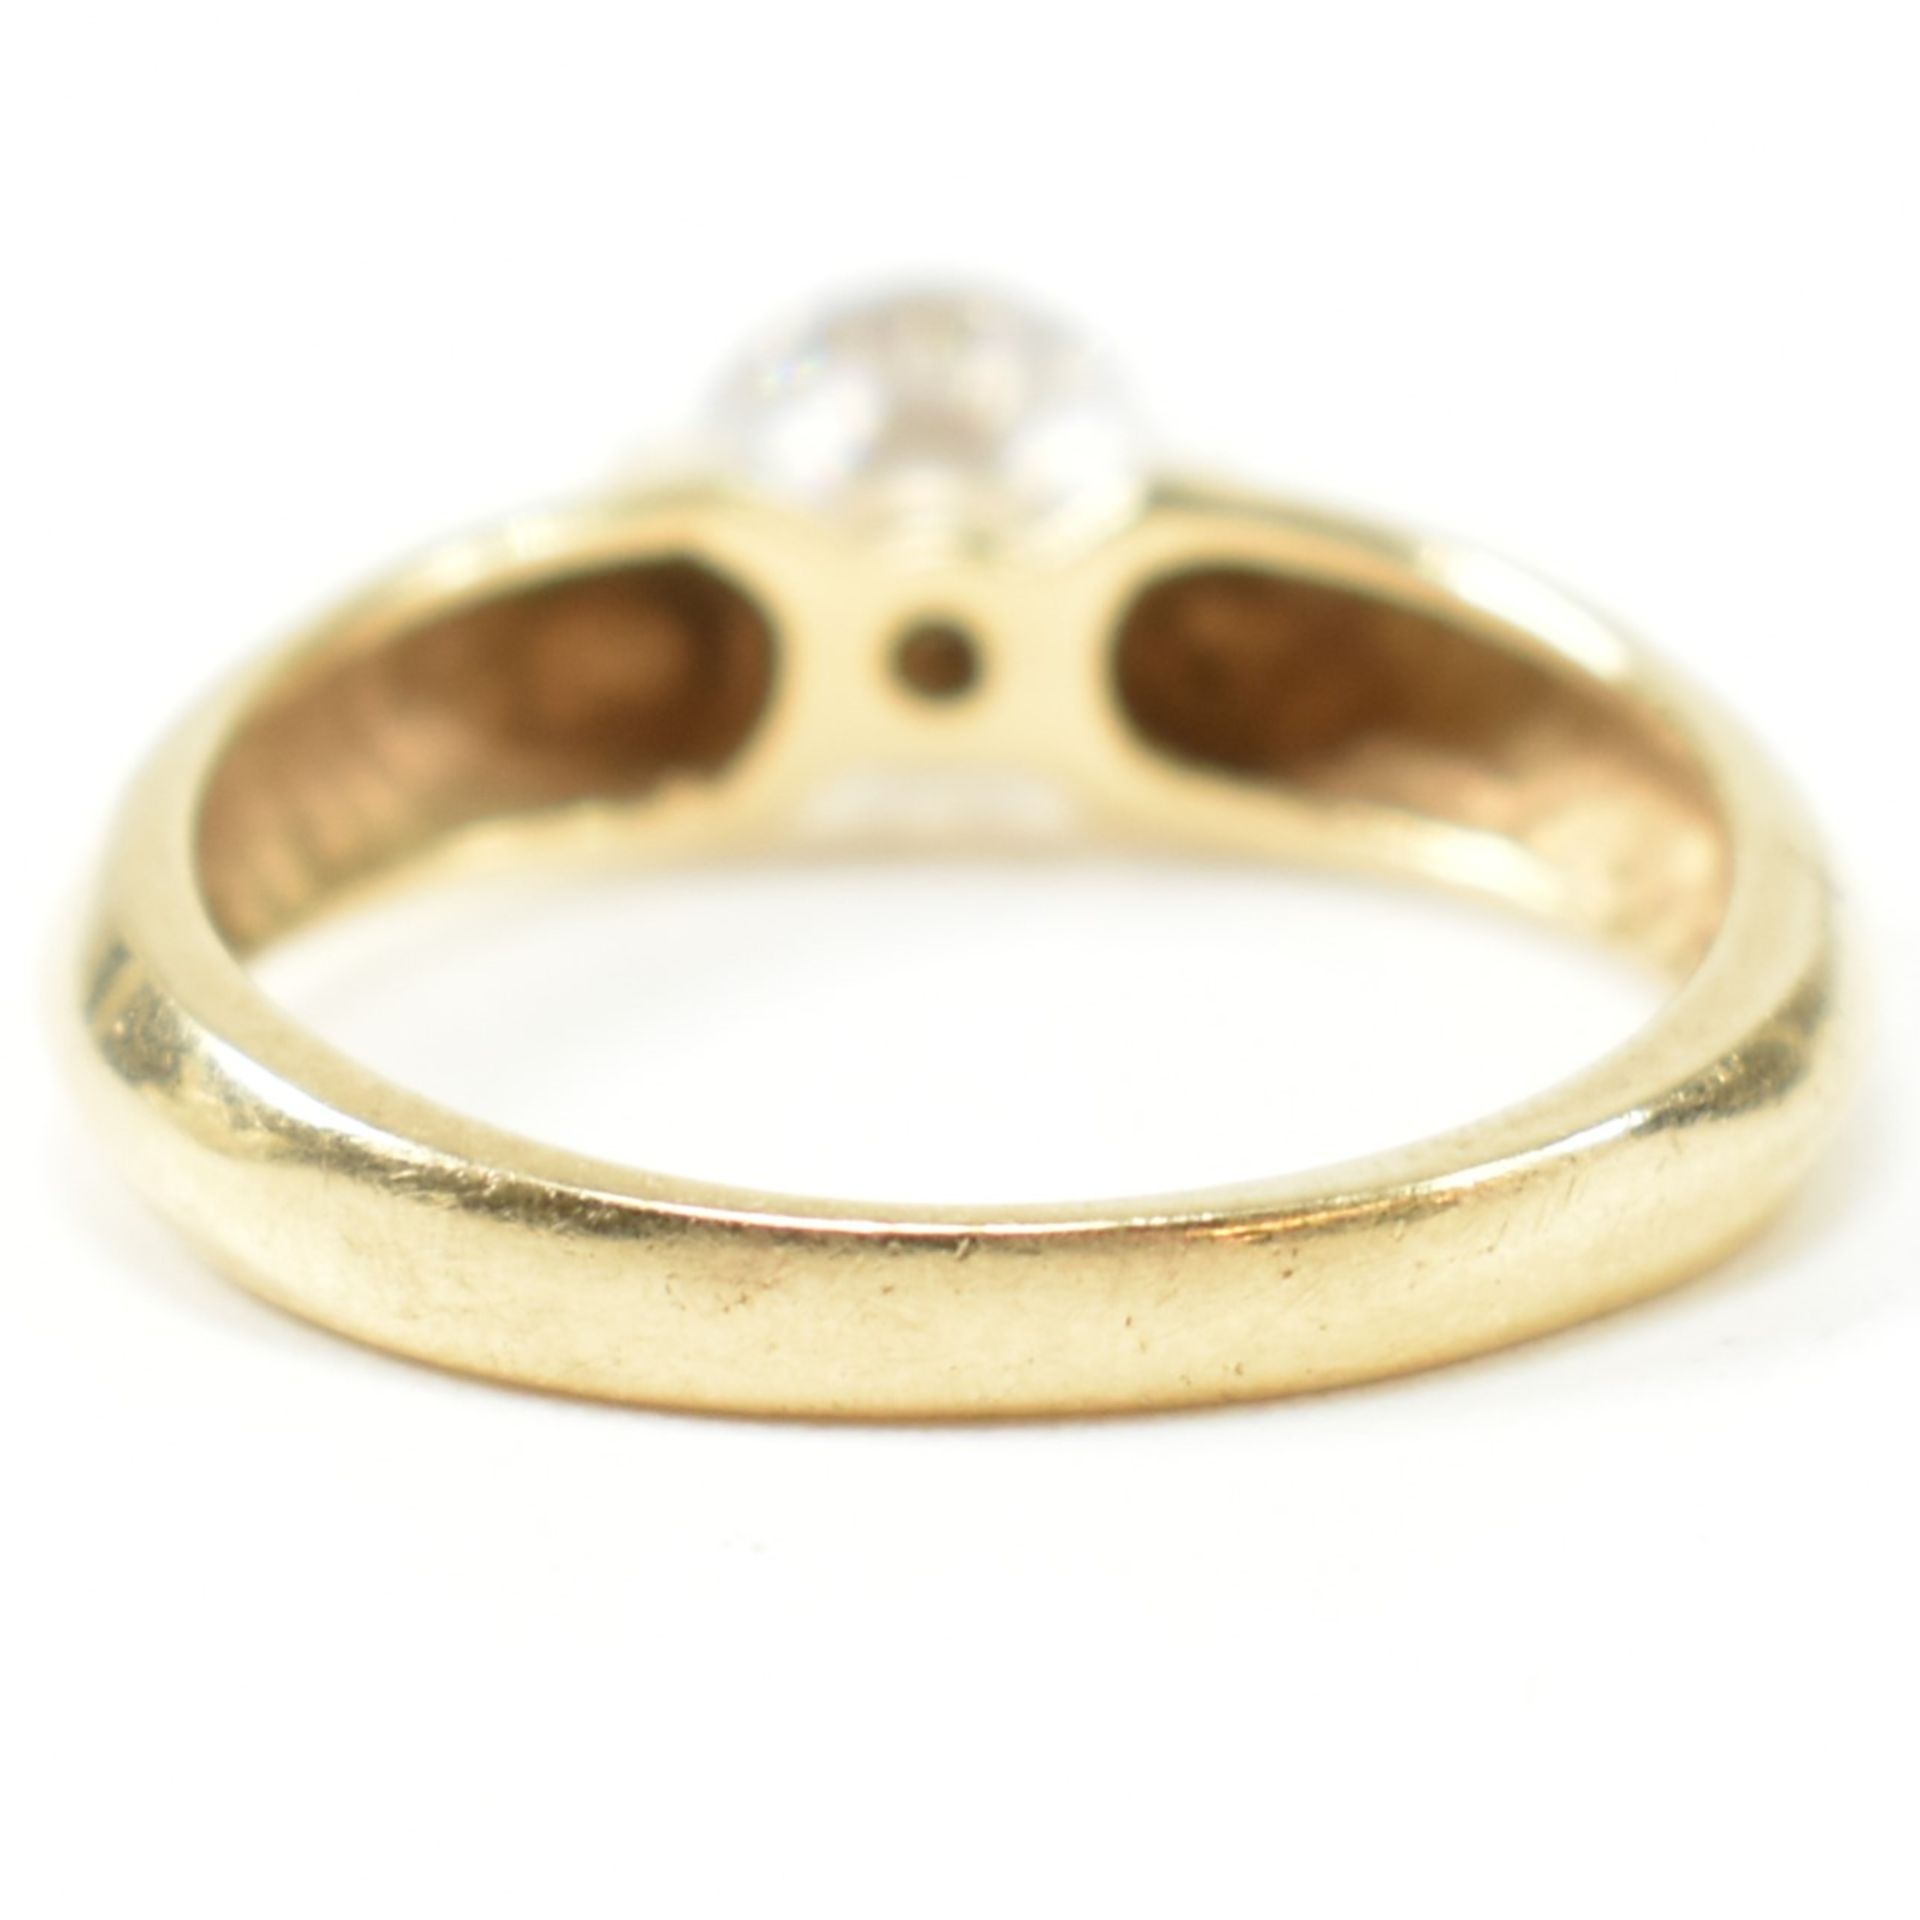 HALLMARKED 14CT GOLD & CZ SOLITAIRE RING - Image 8 of 11